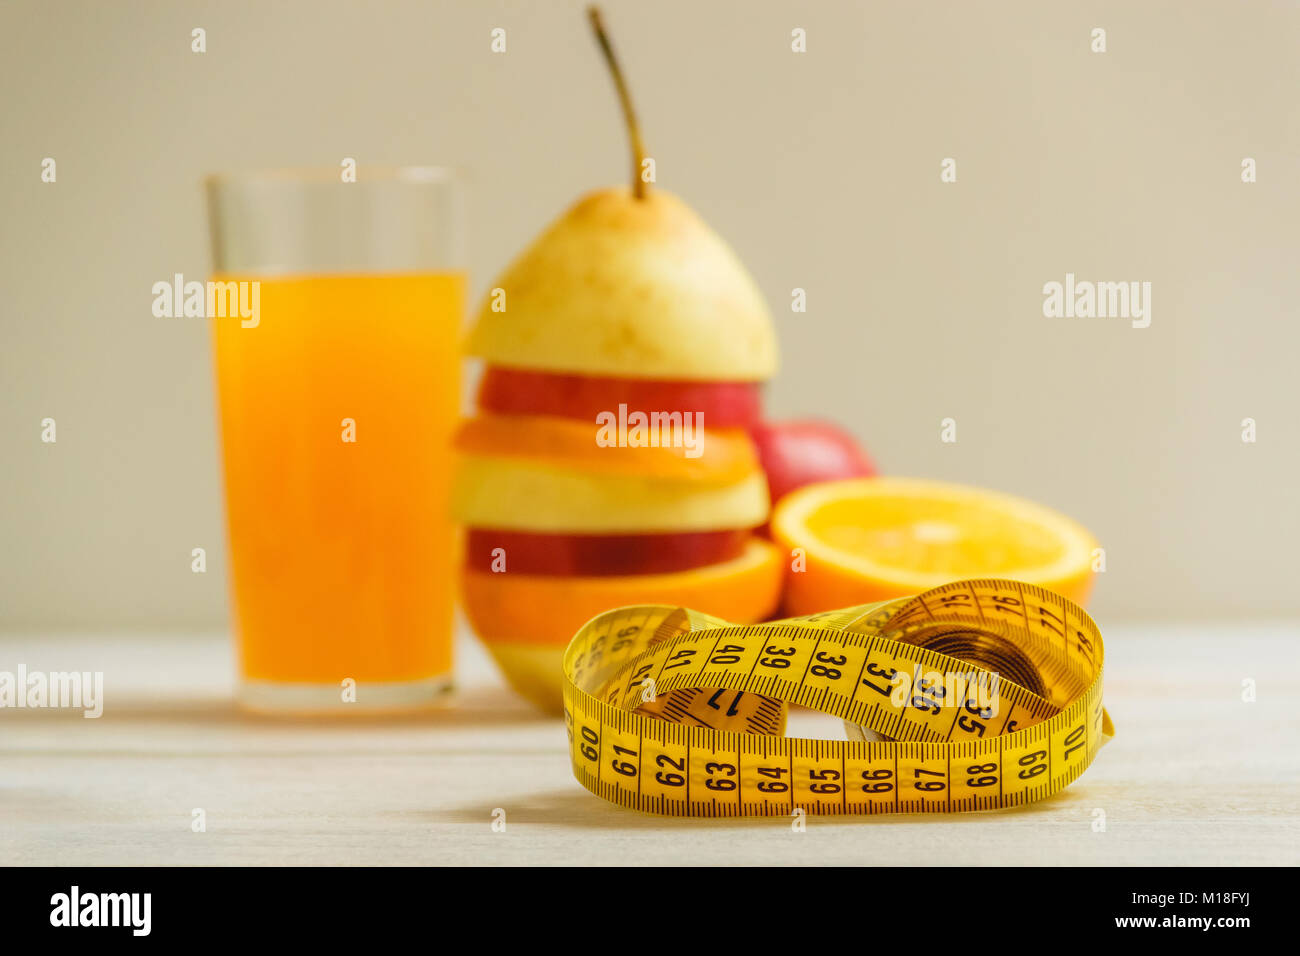 Measure tape and fresh fruit on wooden table. Healthy lifestyle diet with fresh fruits. Stock Photo